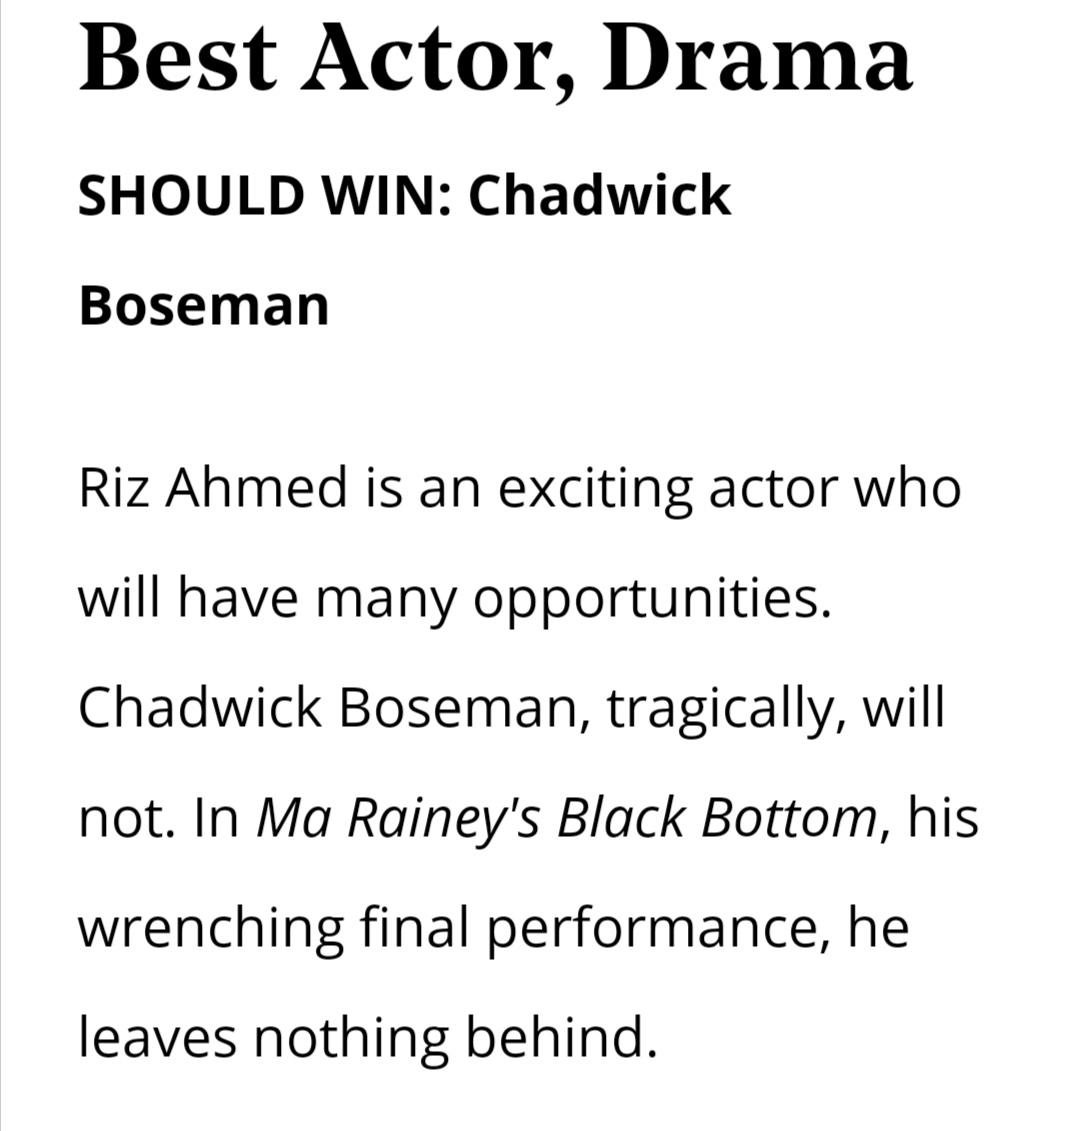 Chadwick boseman best actor award? What the hell is wrong with this biased Hollywood voters. Instead of giving awards on performance they are giving sympathy awards to boseman. Riz ahmed and hopkins are far ahead in performance. #SAGAwards #sagawards2021 #Oscars #SoundOfMetal https://t.co/MS0gcqrctj